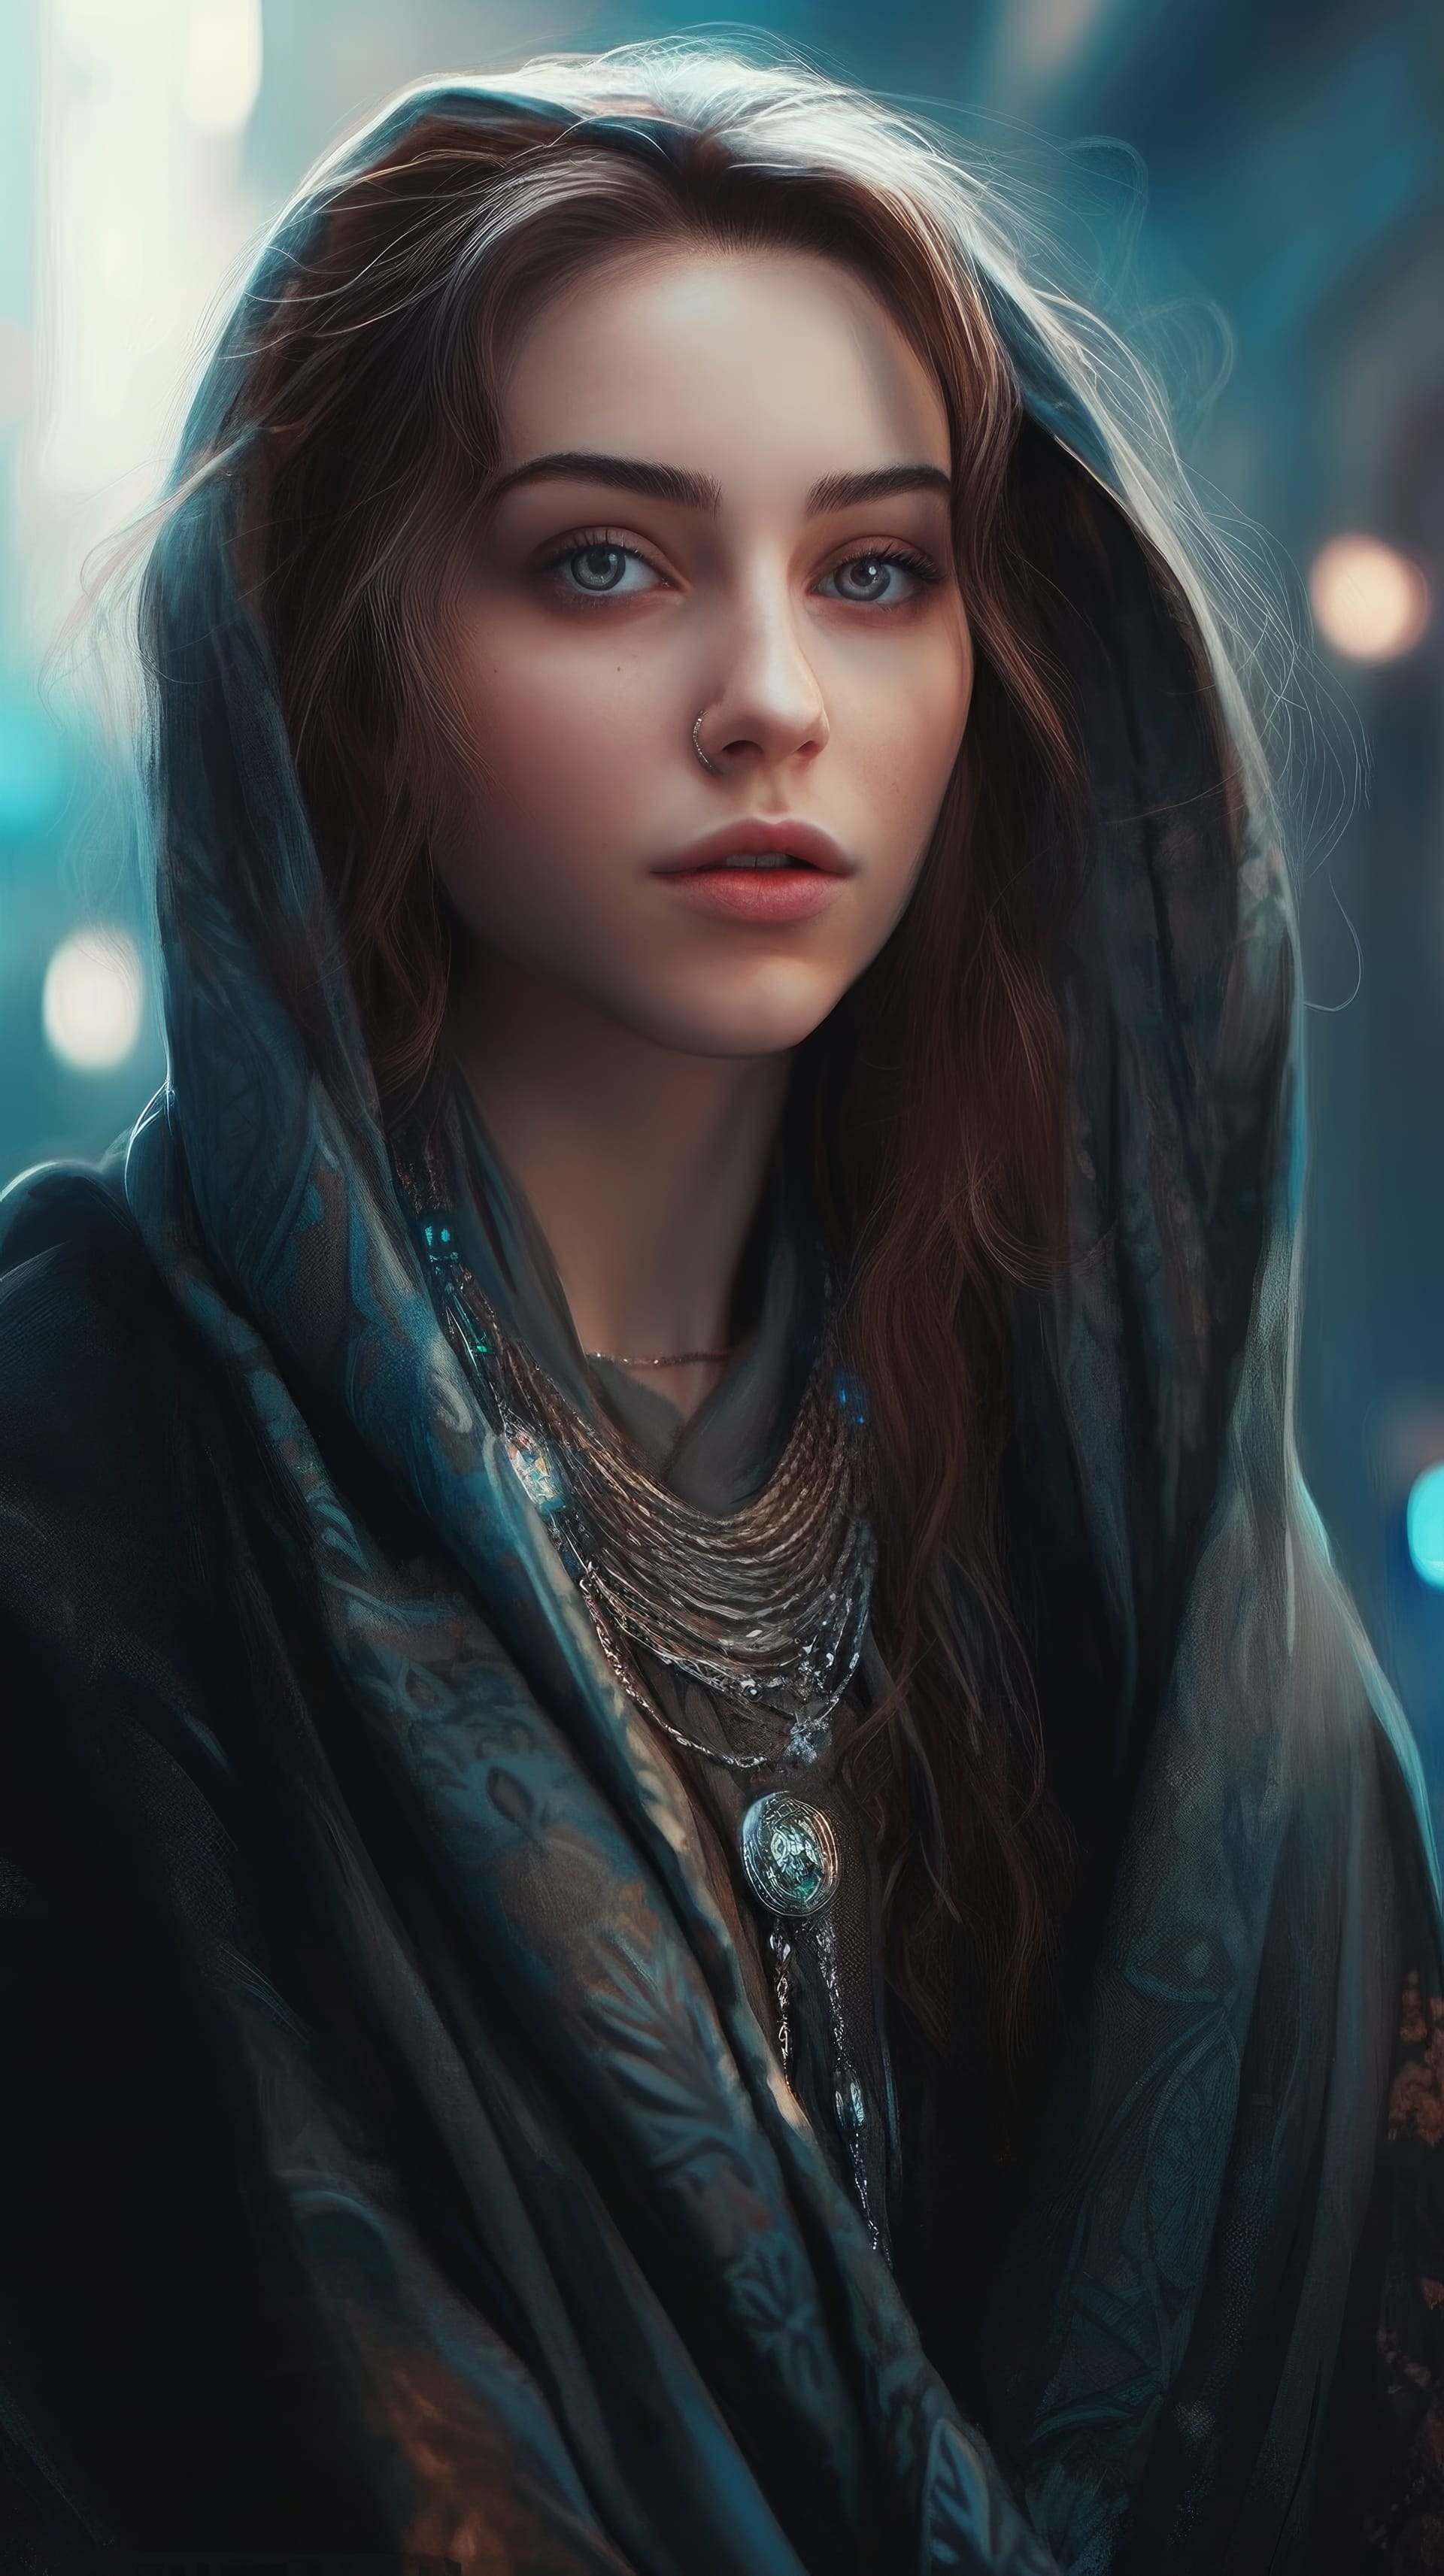 Girl with hood necklace best profile picture for facebook